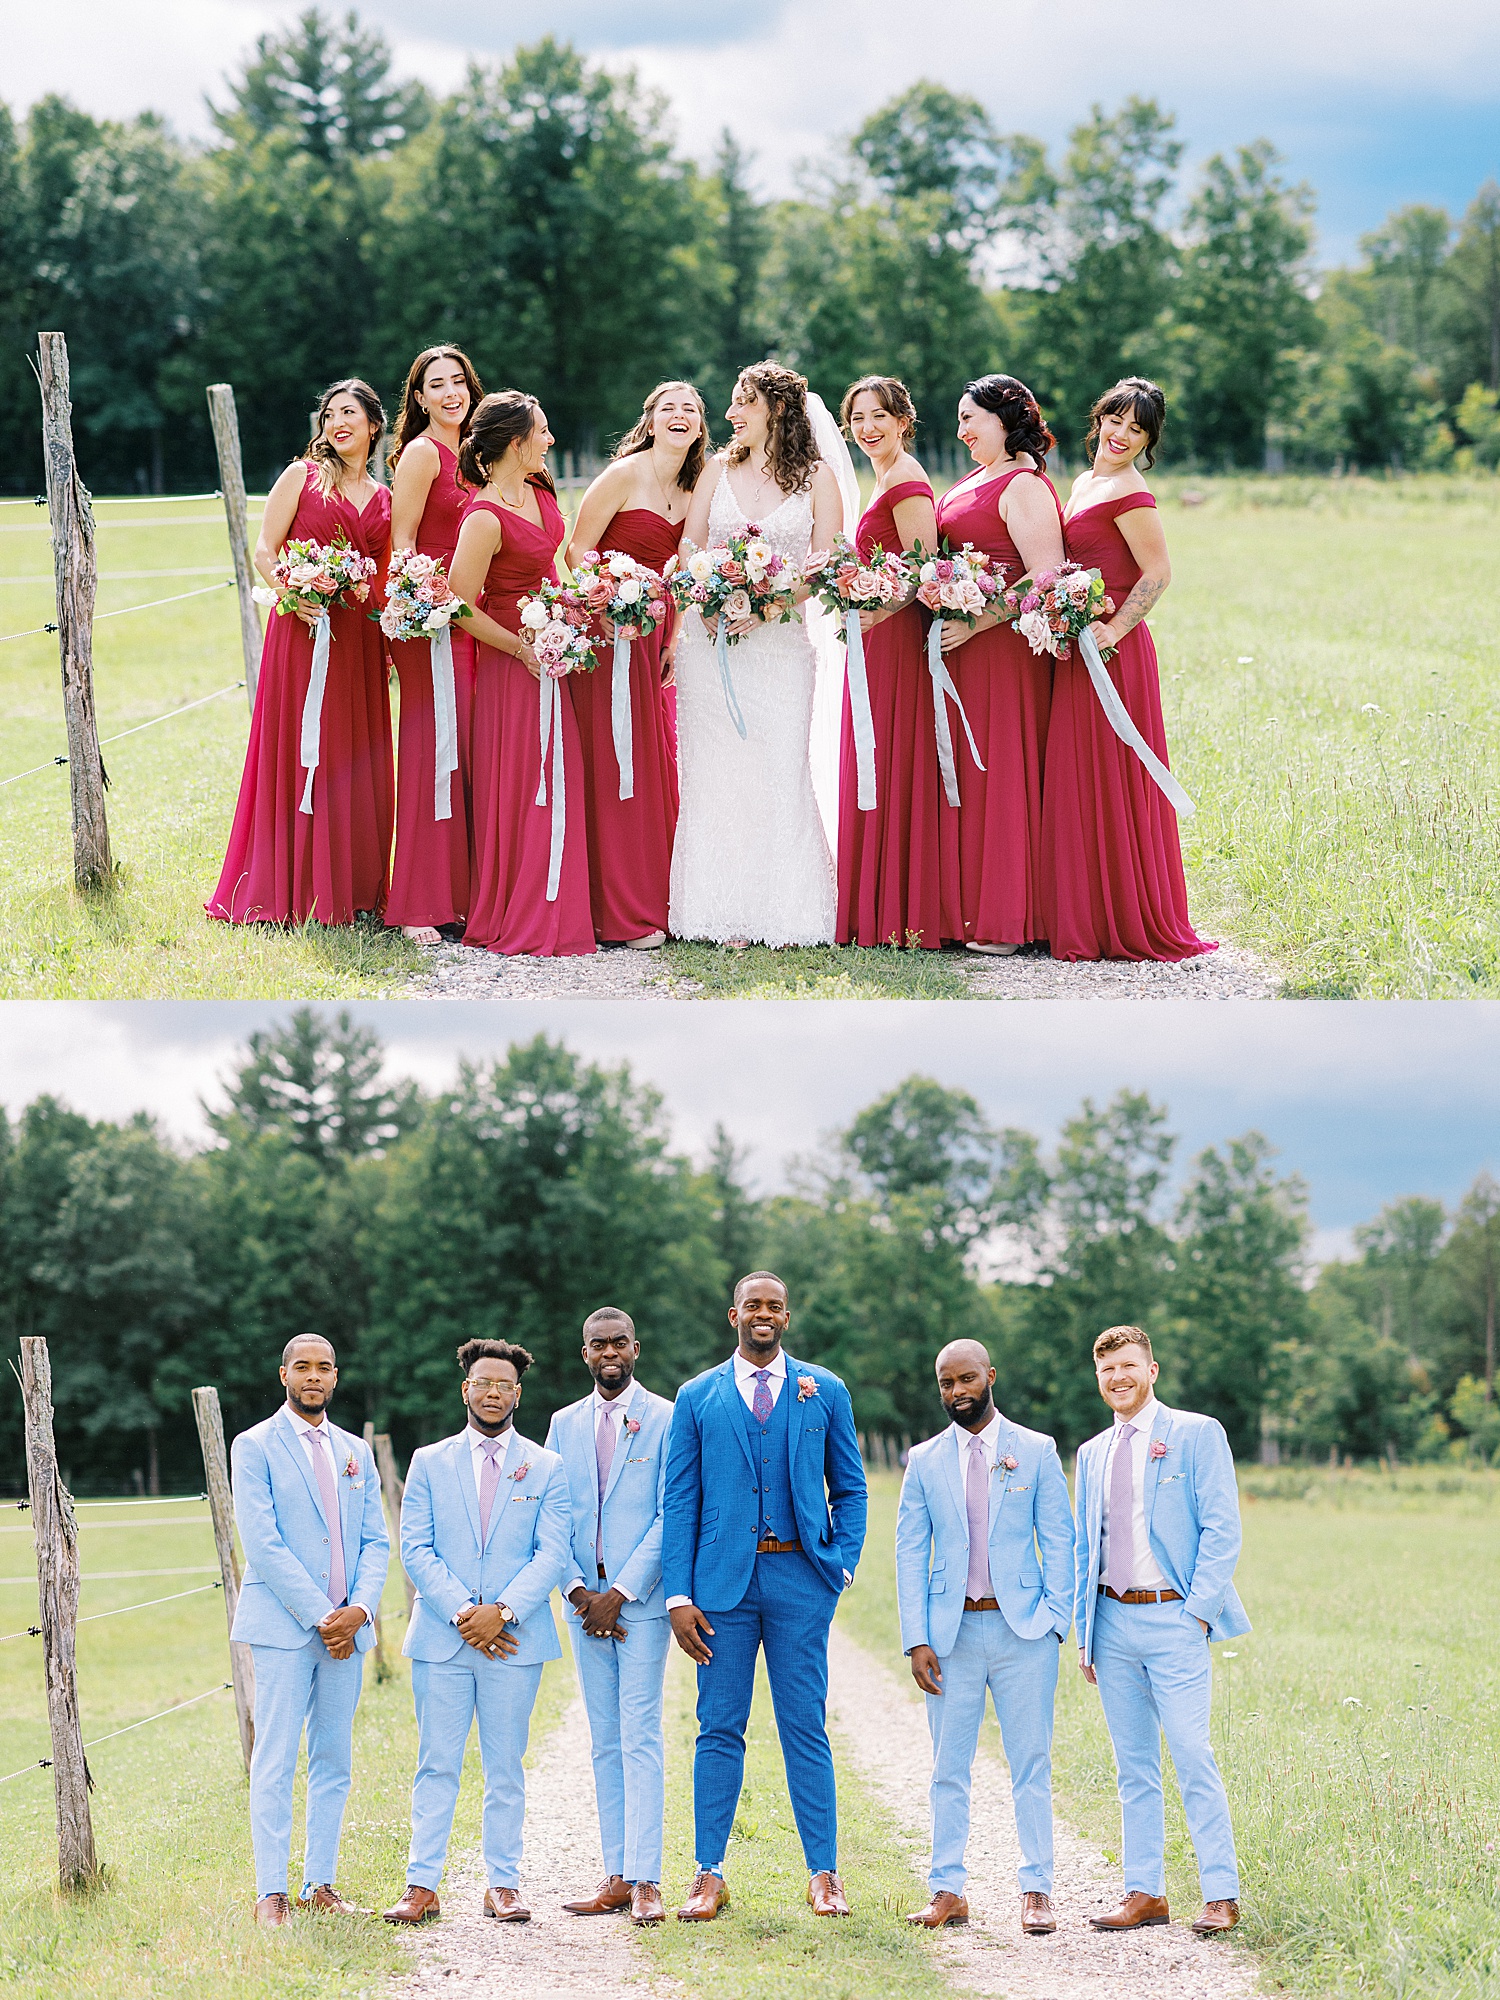 Wedding party in red & blue for Summer day by Lynne Reznick photography 